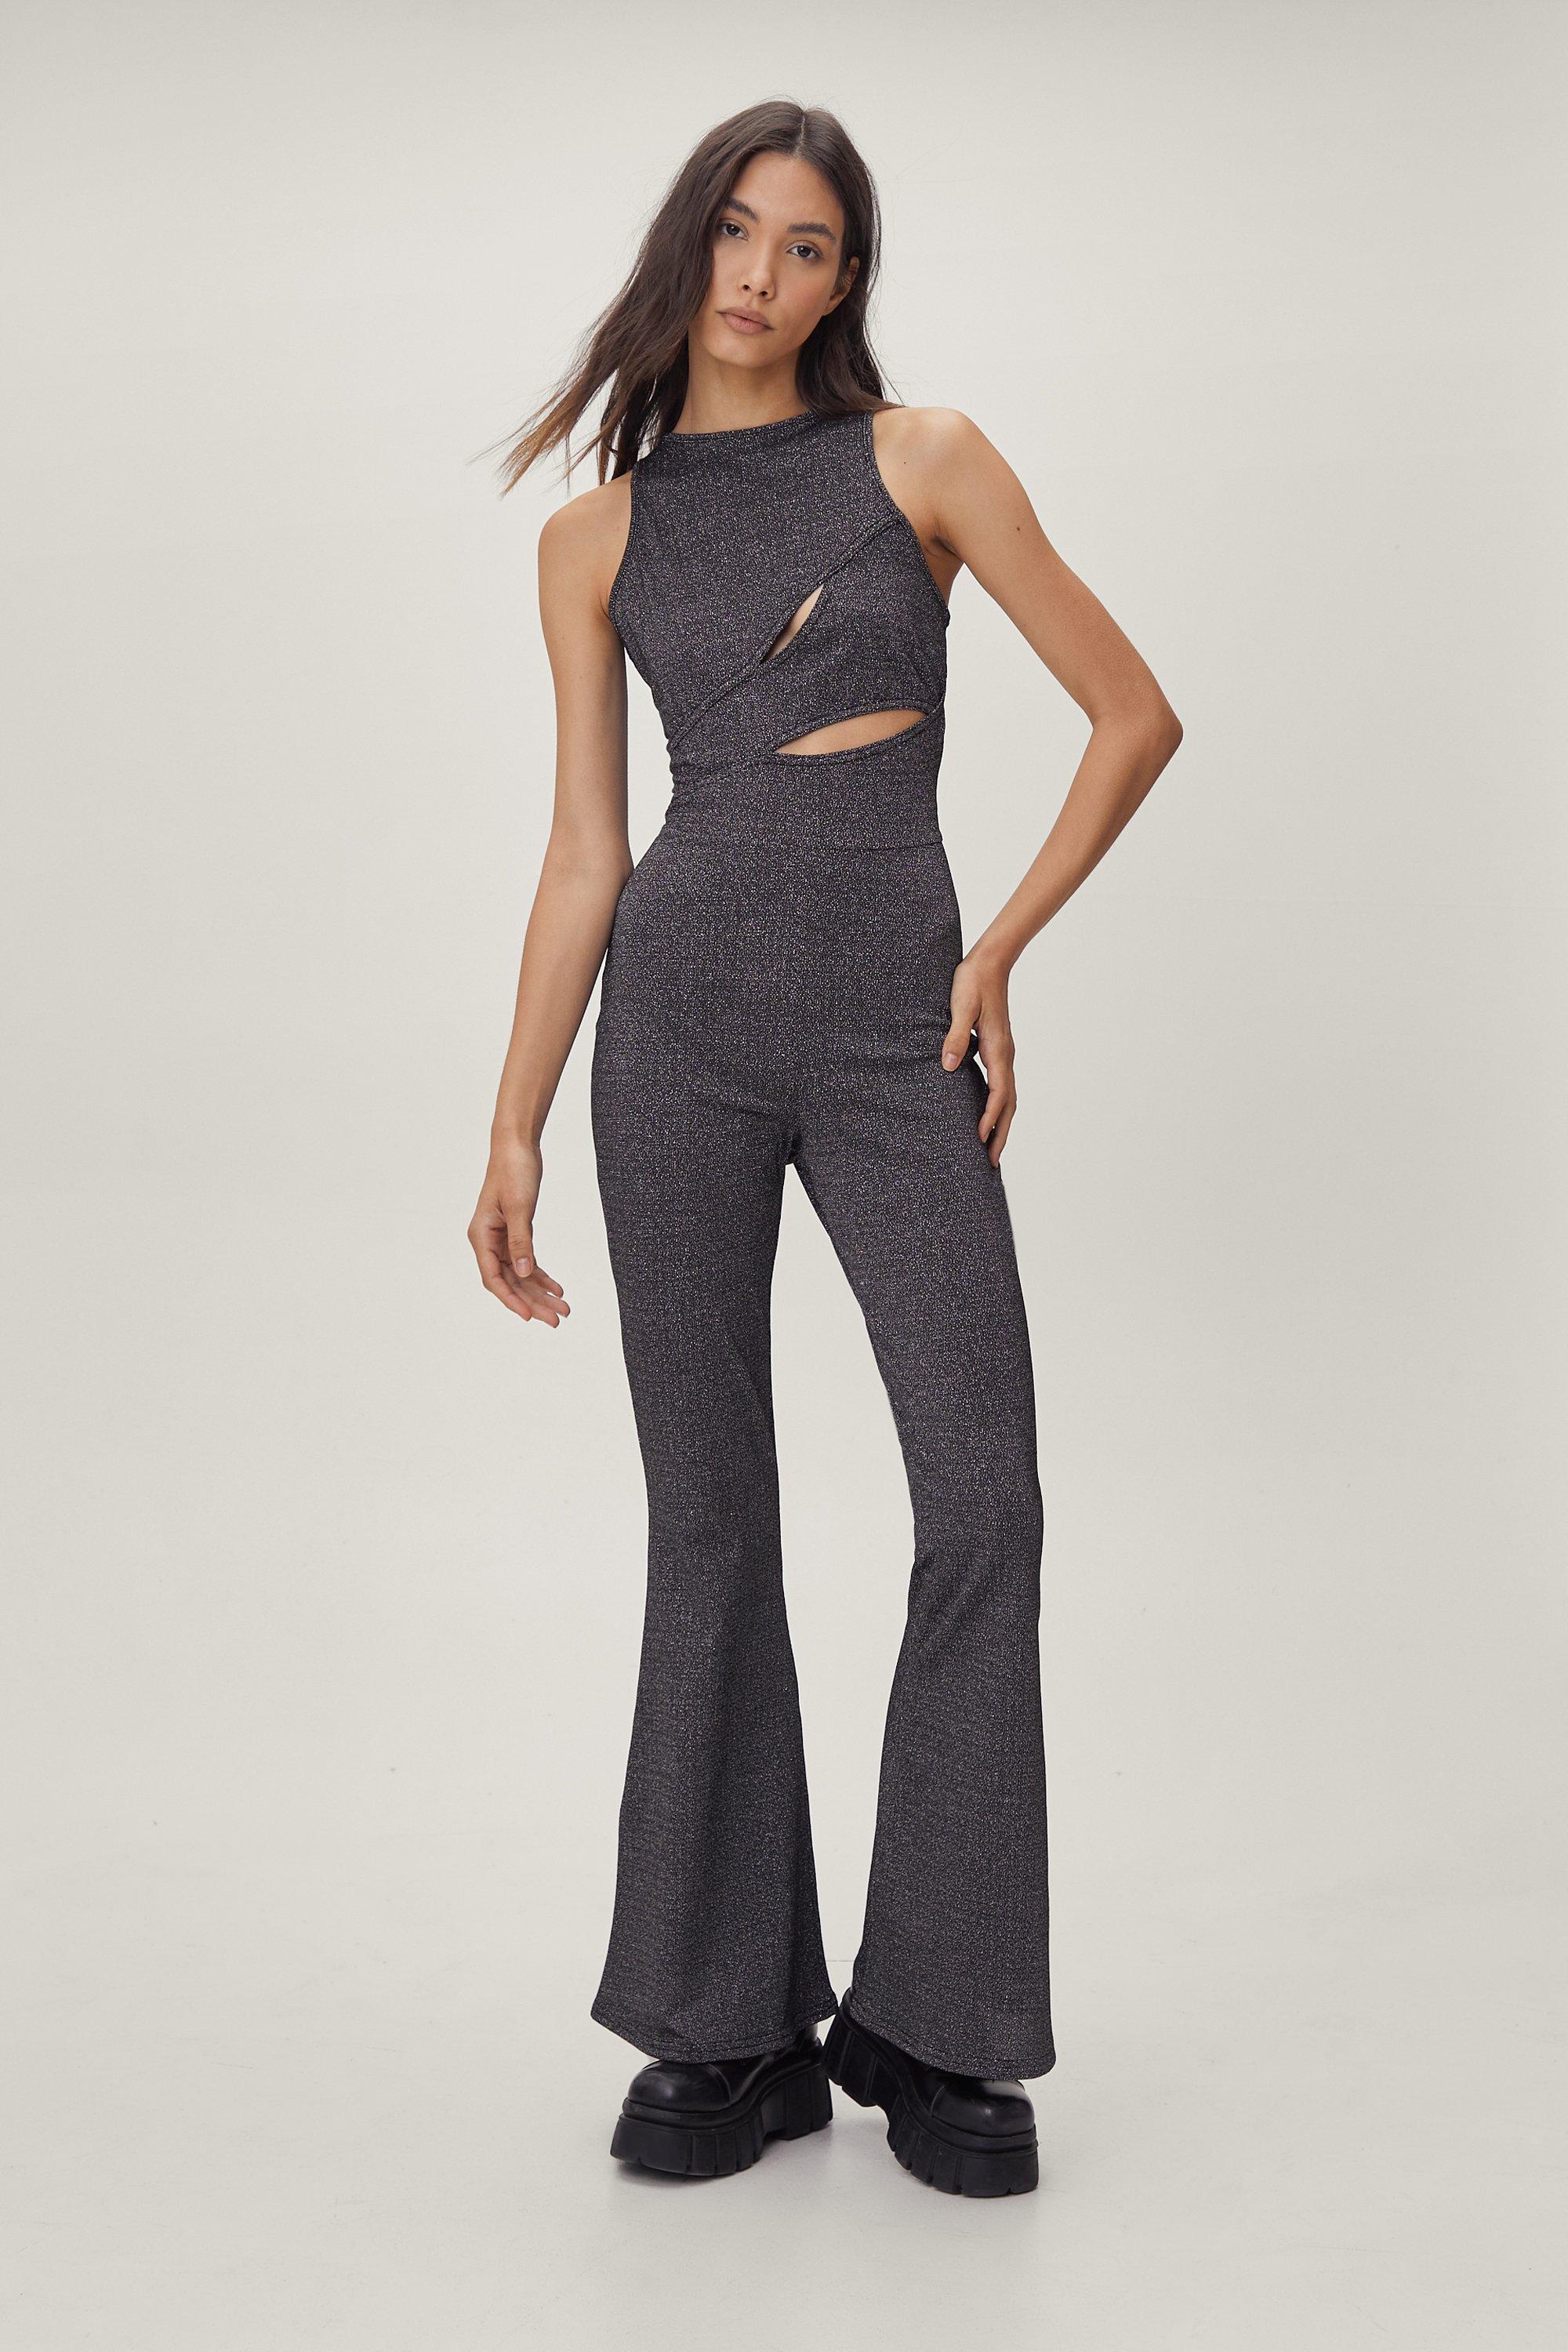 Olive Acetate Slinky Ring Cut Out Halter Jumpsuit